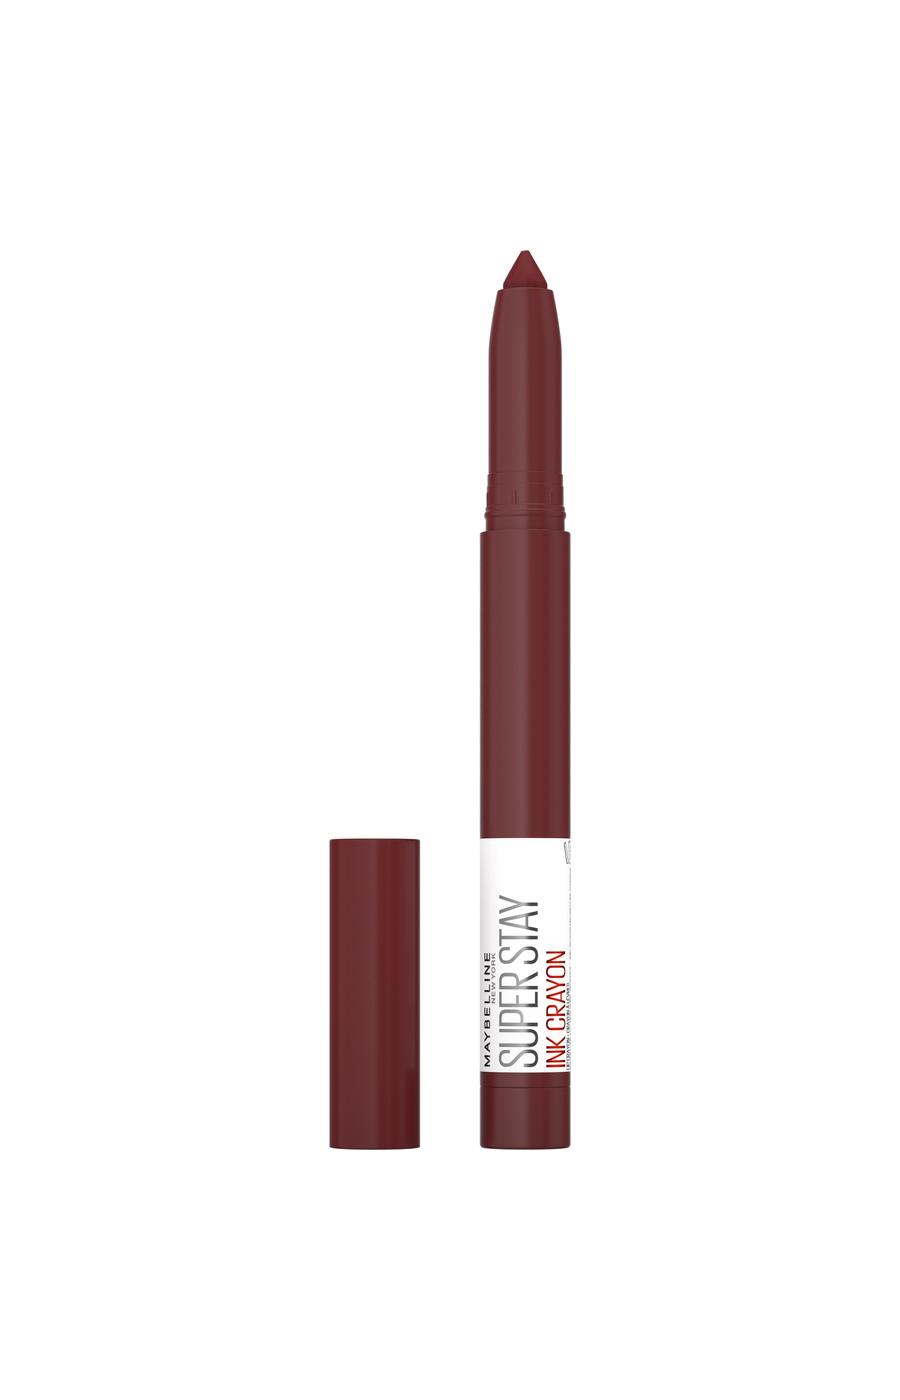 Maybelline Super Stay Ink Crayon Lipstick - Drive Future; image 2 of 3